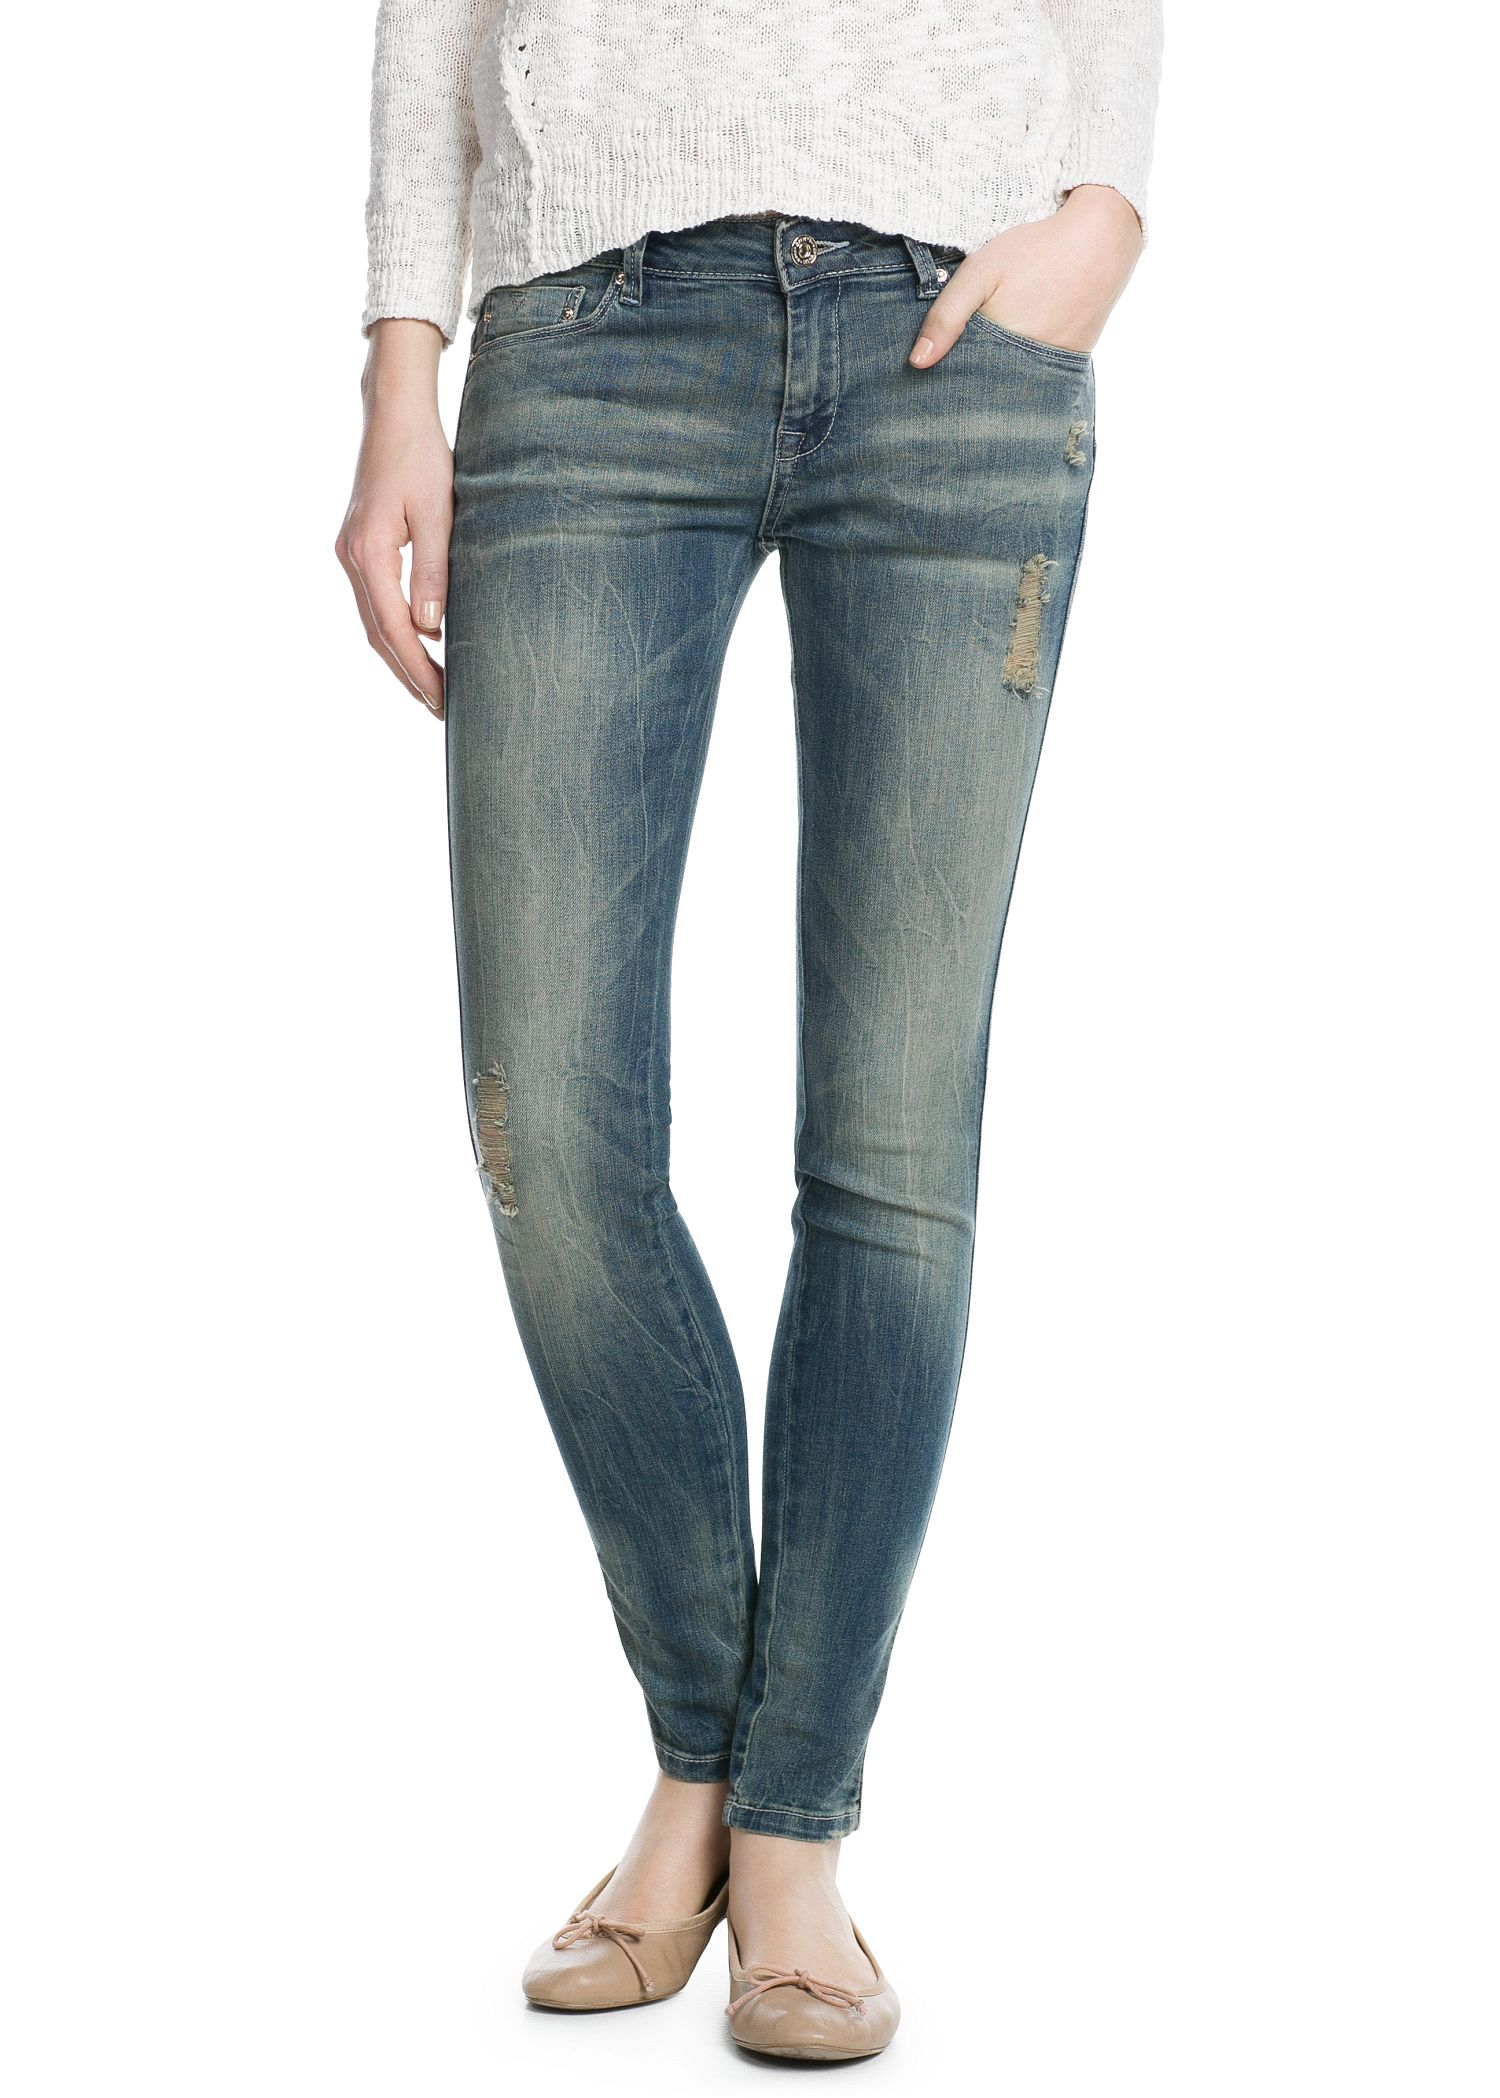 Lyst - Mango Push Up Uptown Jeans in Blue